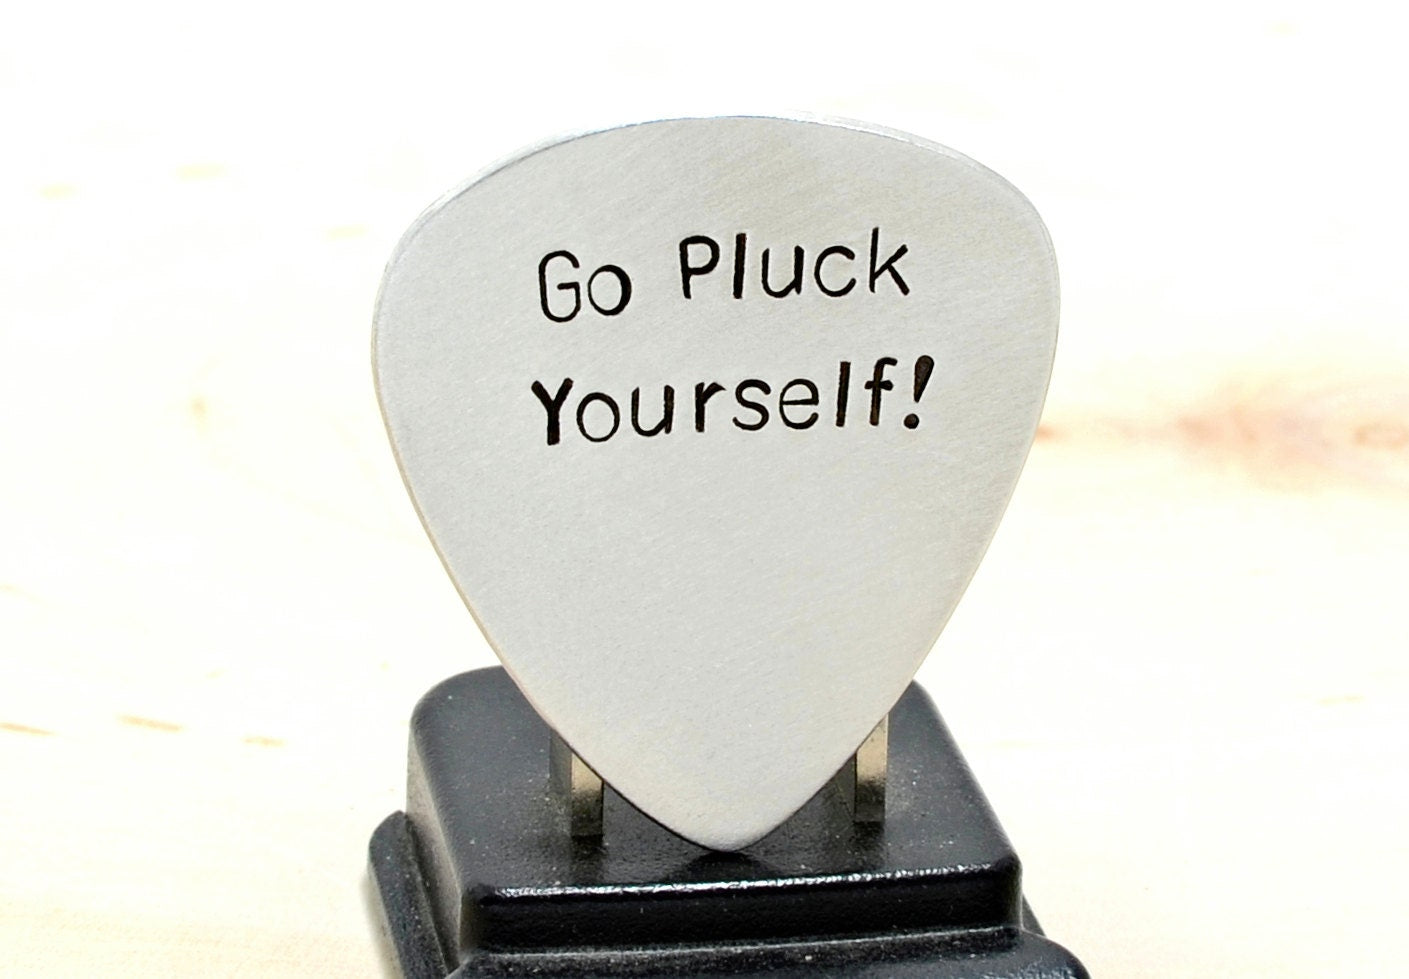 Silver guitar pick with Go Pluck Yourself